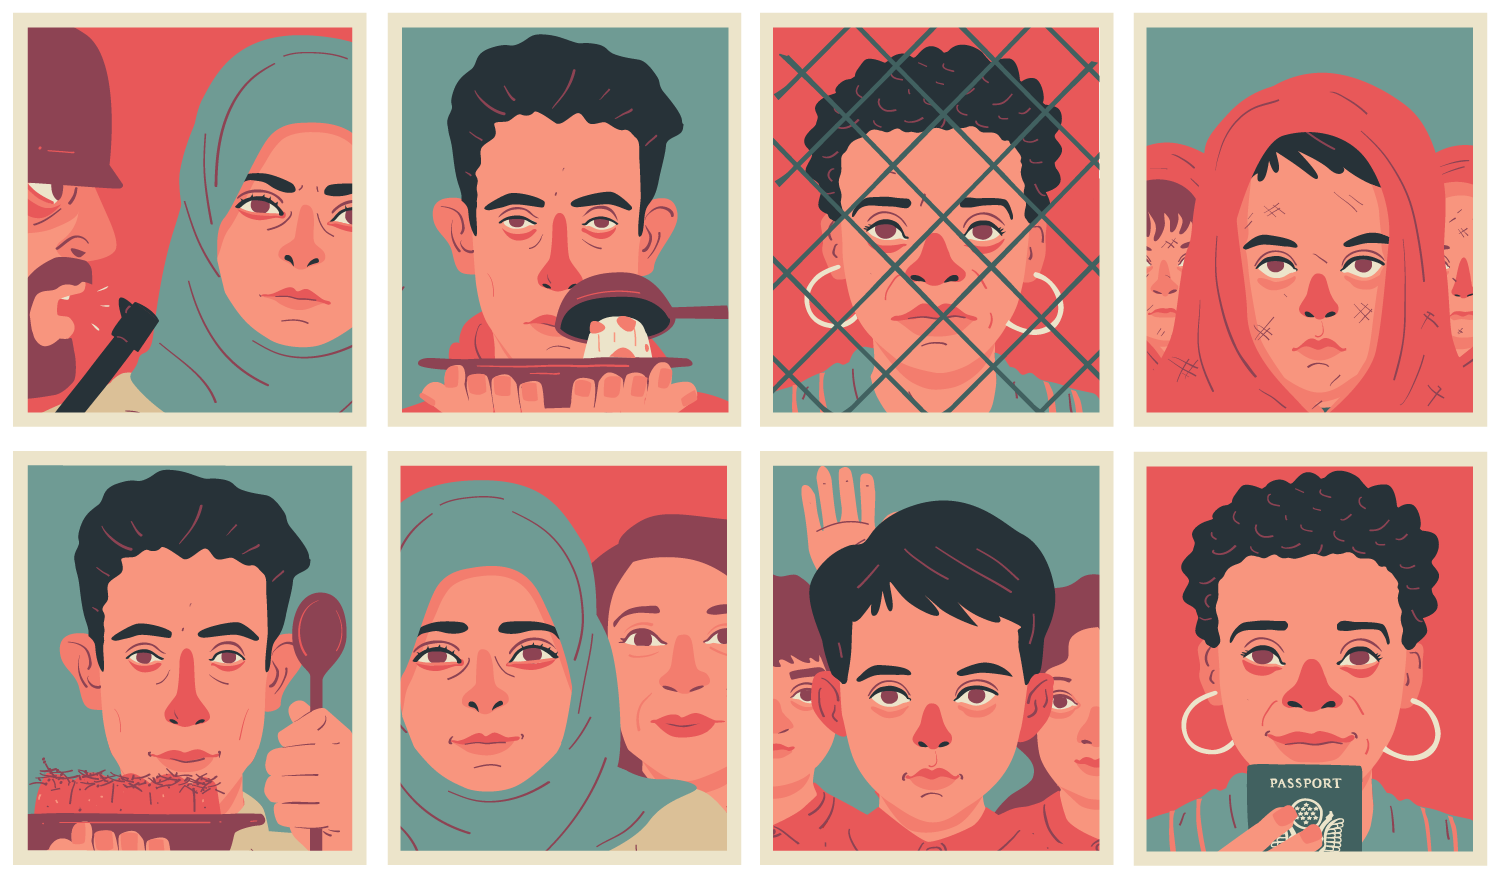 Grid of illustrations of various aspects of refugees' lives